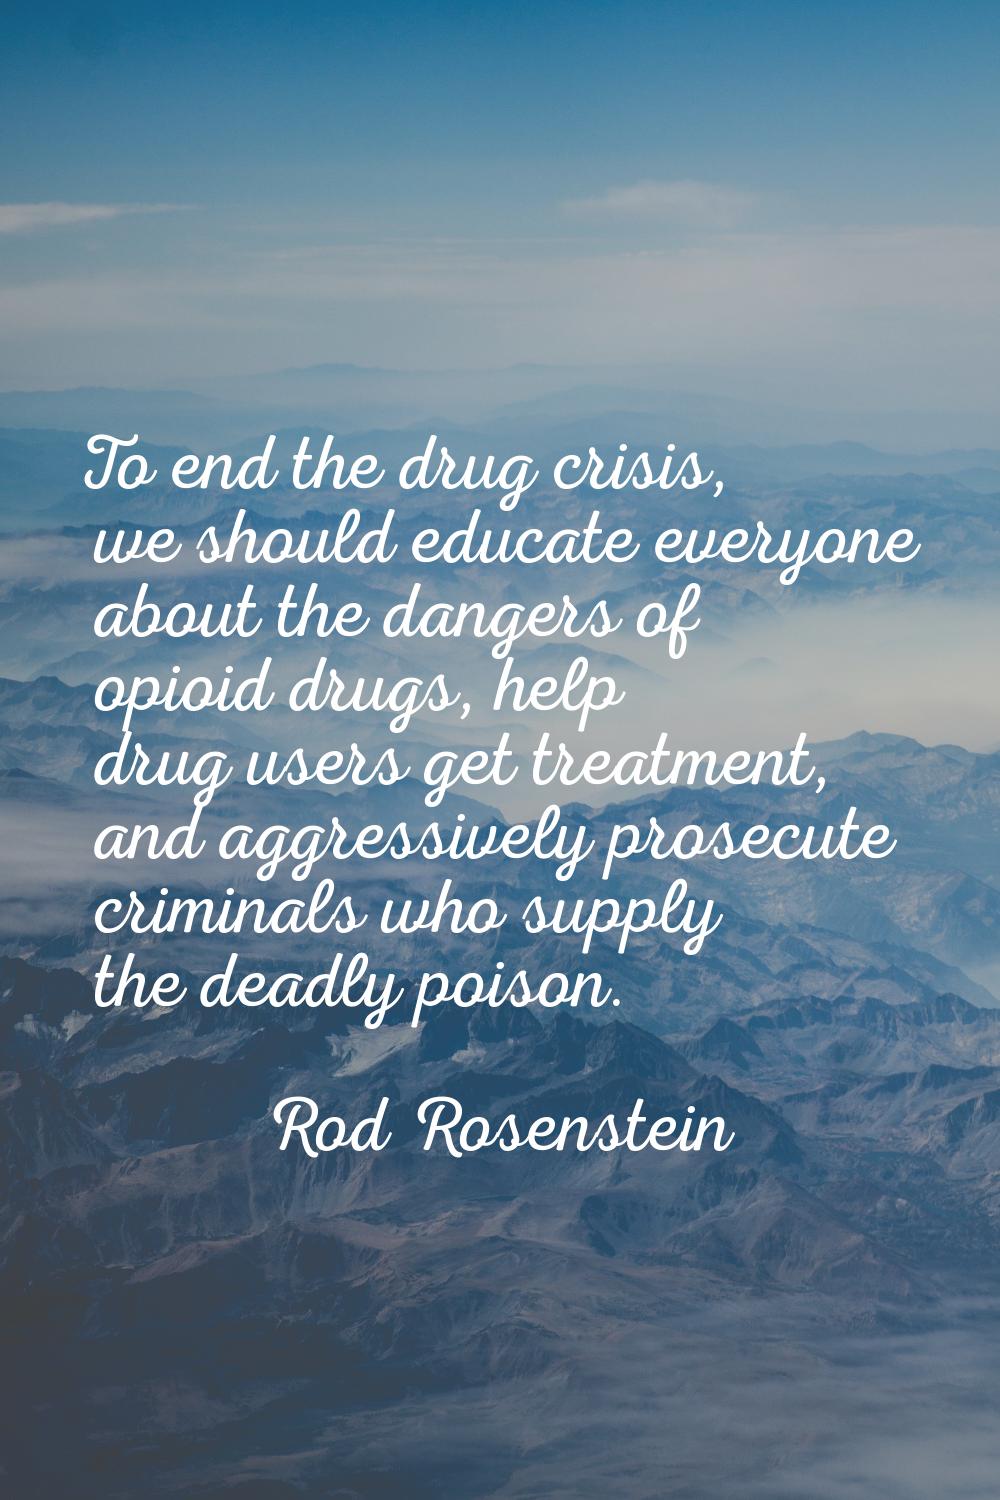 To end the drug crisis, we should educate everyone about the dangers of opioid drugs, help drug use